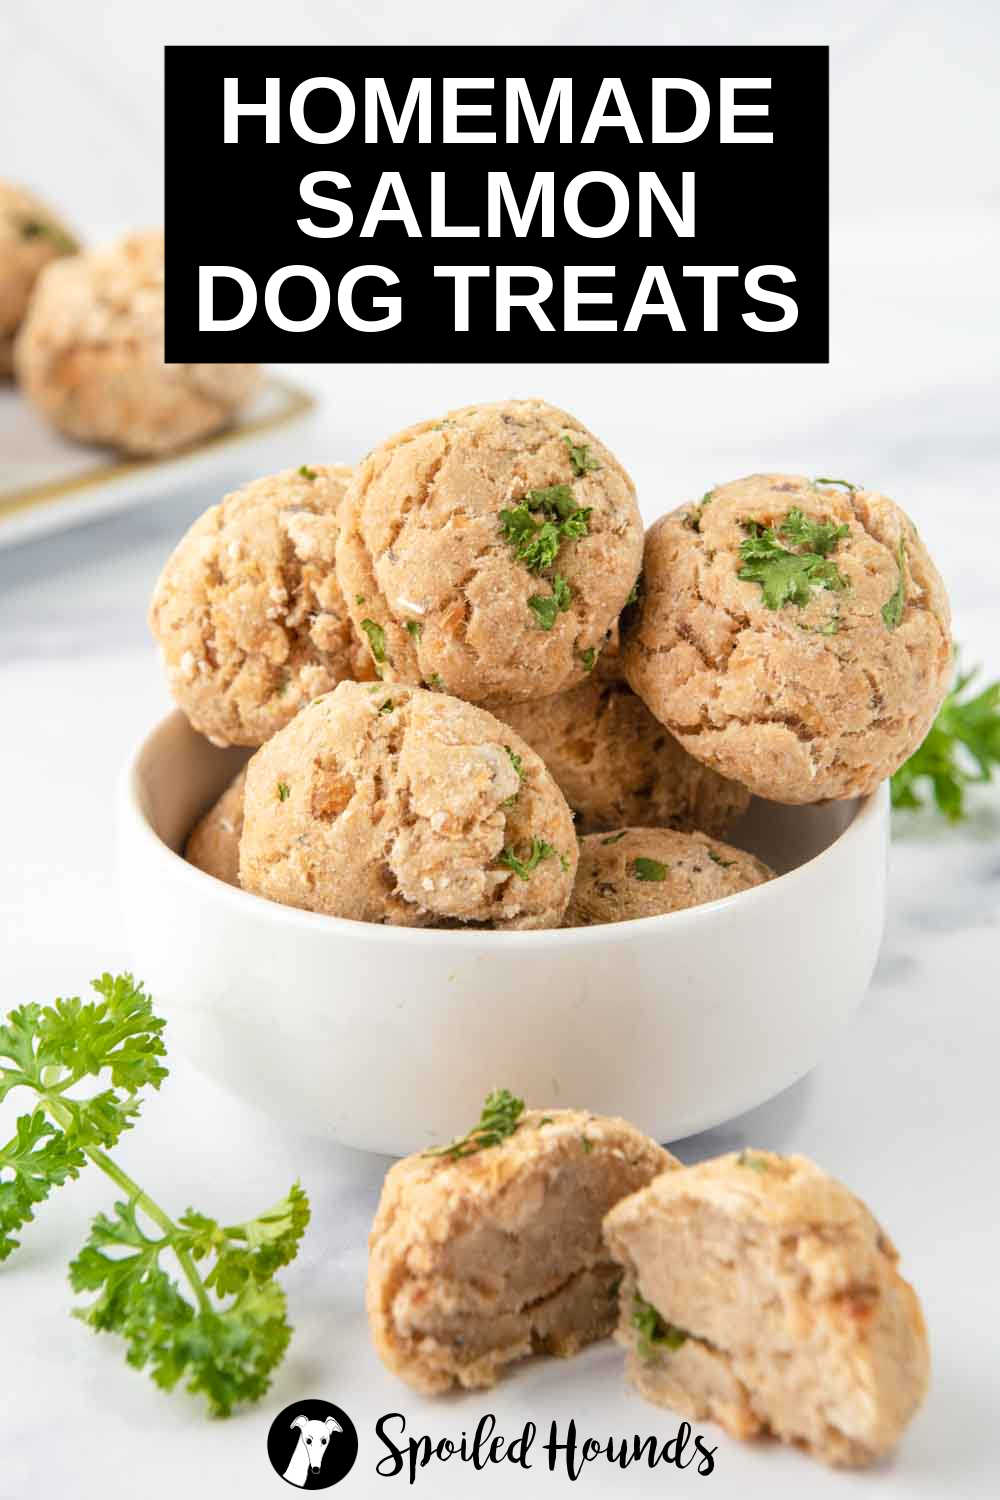 homemade salmon dog treats in a bowl and one in front cut in half.